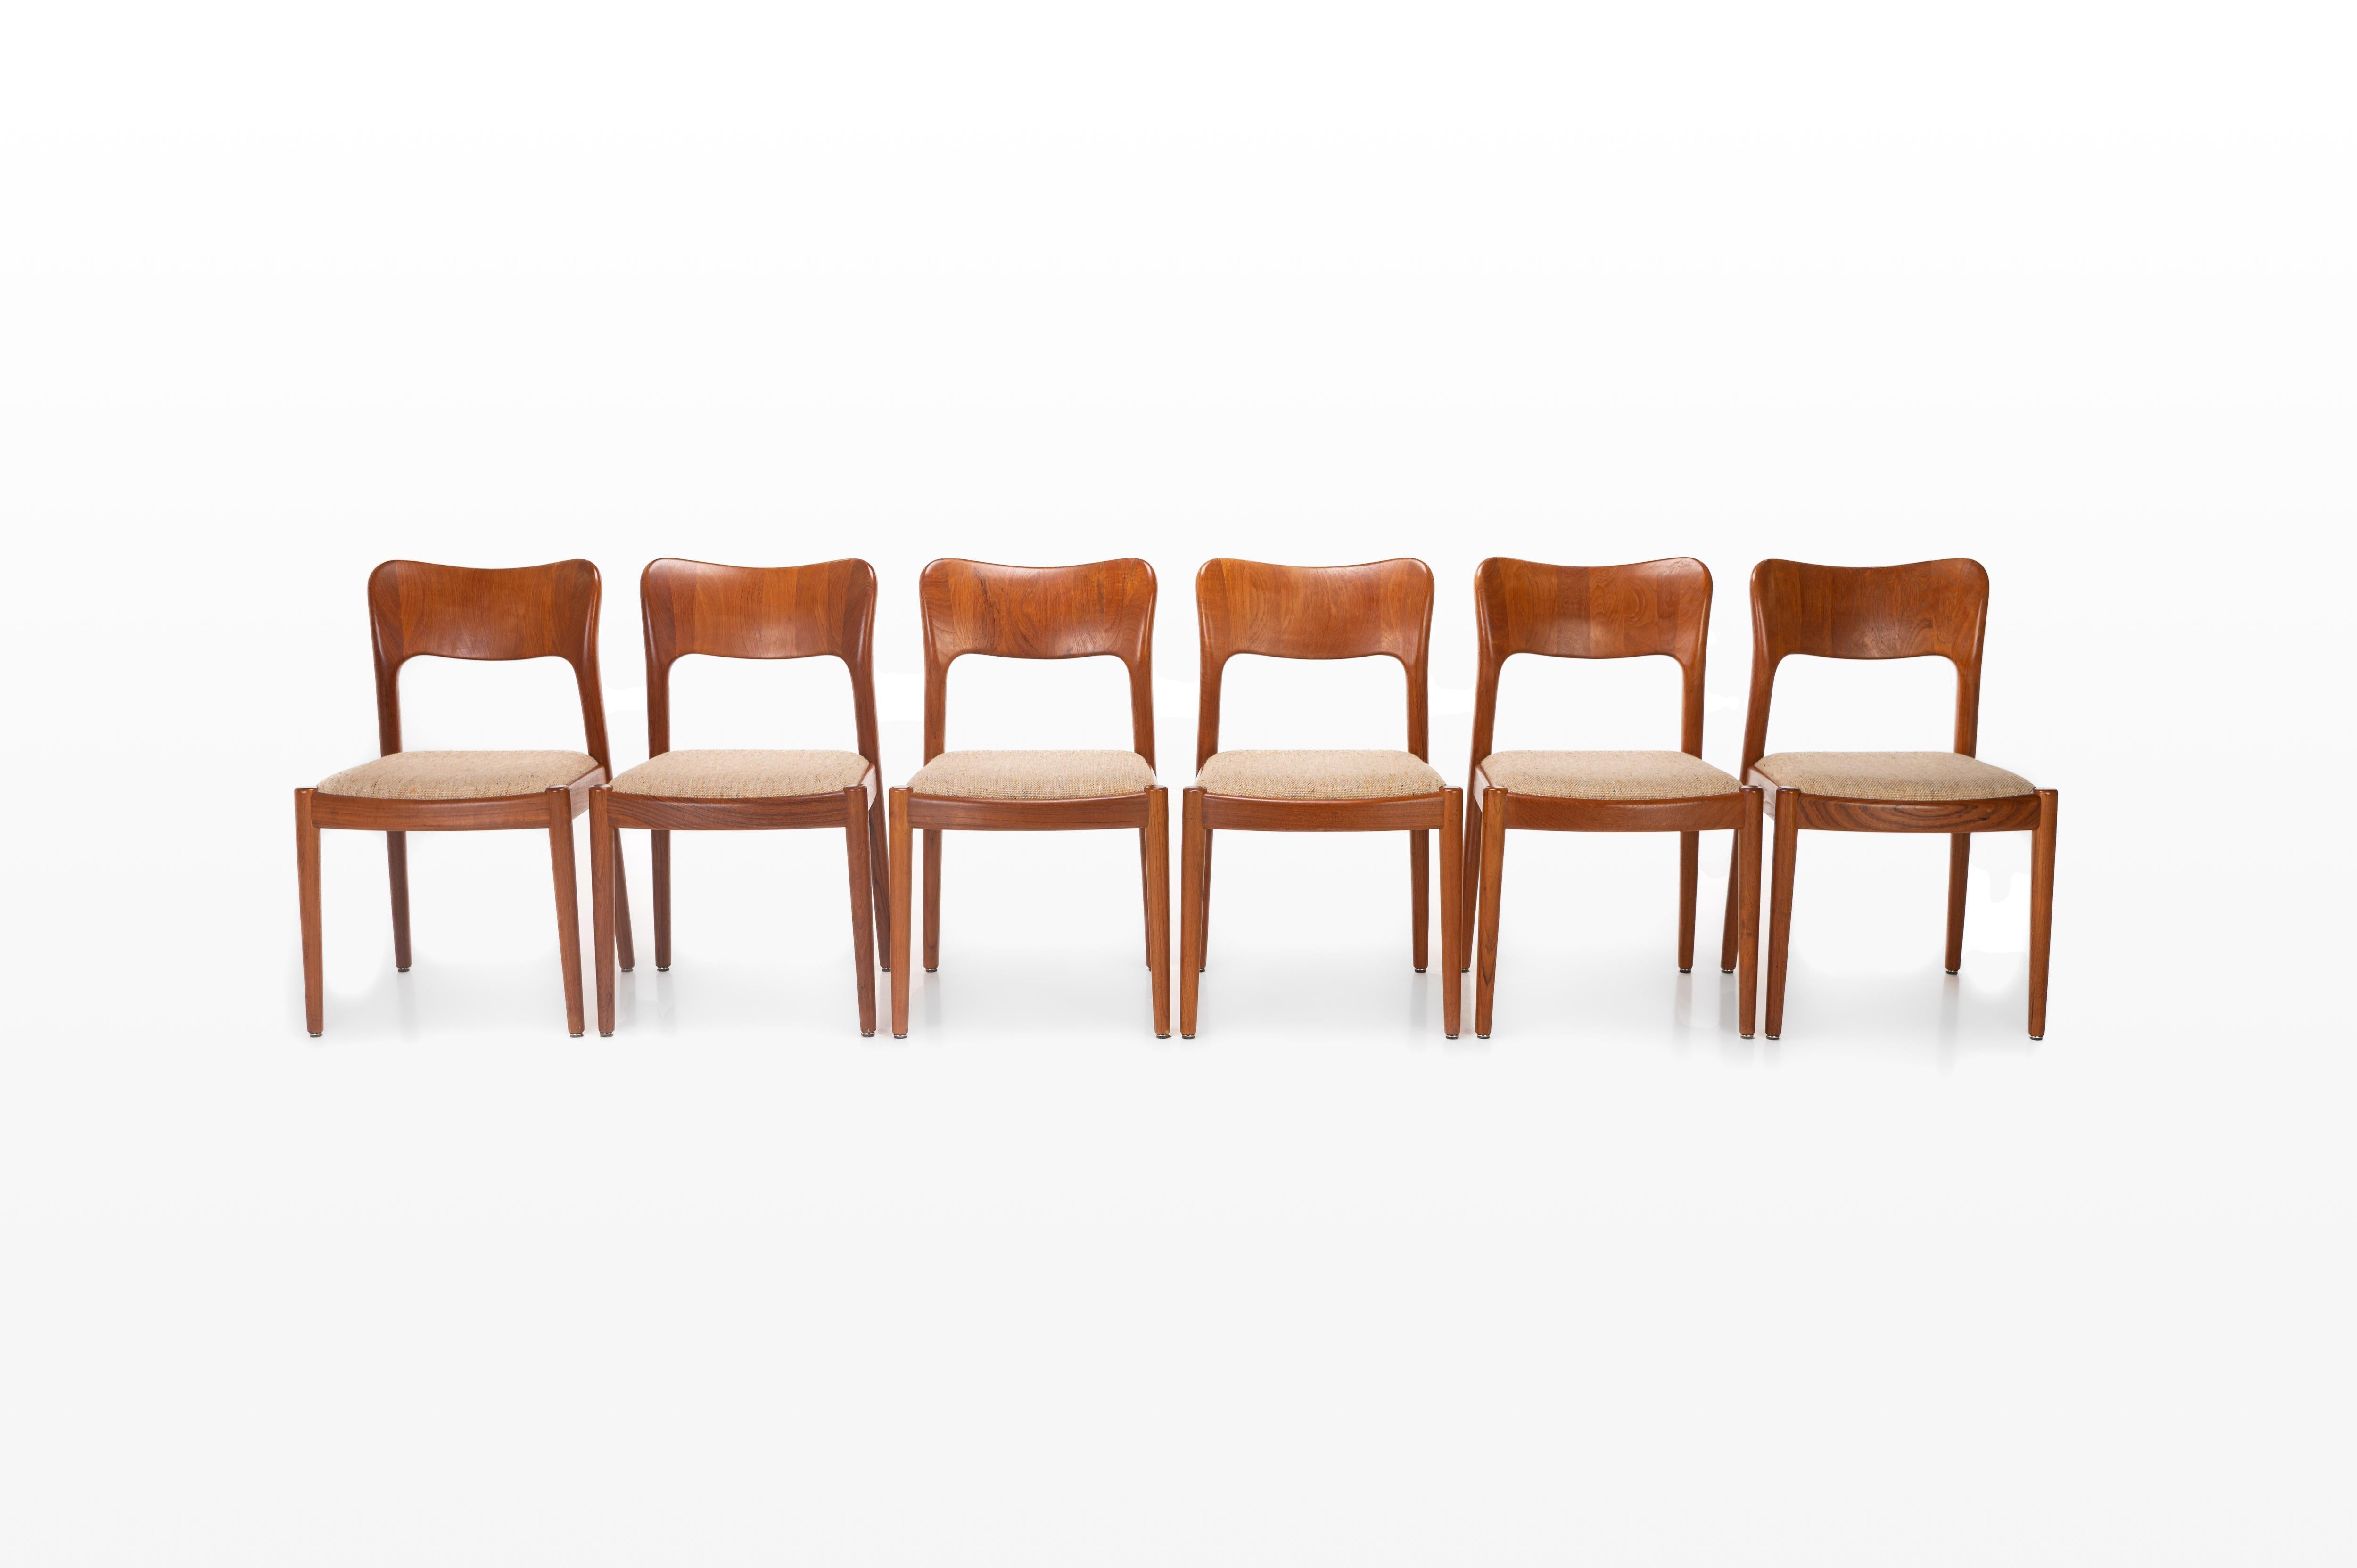 Set of 6 vintage dining chairs designed by Niels Koefoed for Hørnslet Møbelfabrik, Denmark. The chairs have a teak frame and beige wool upholstery.
 